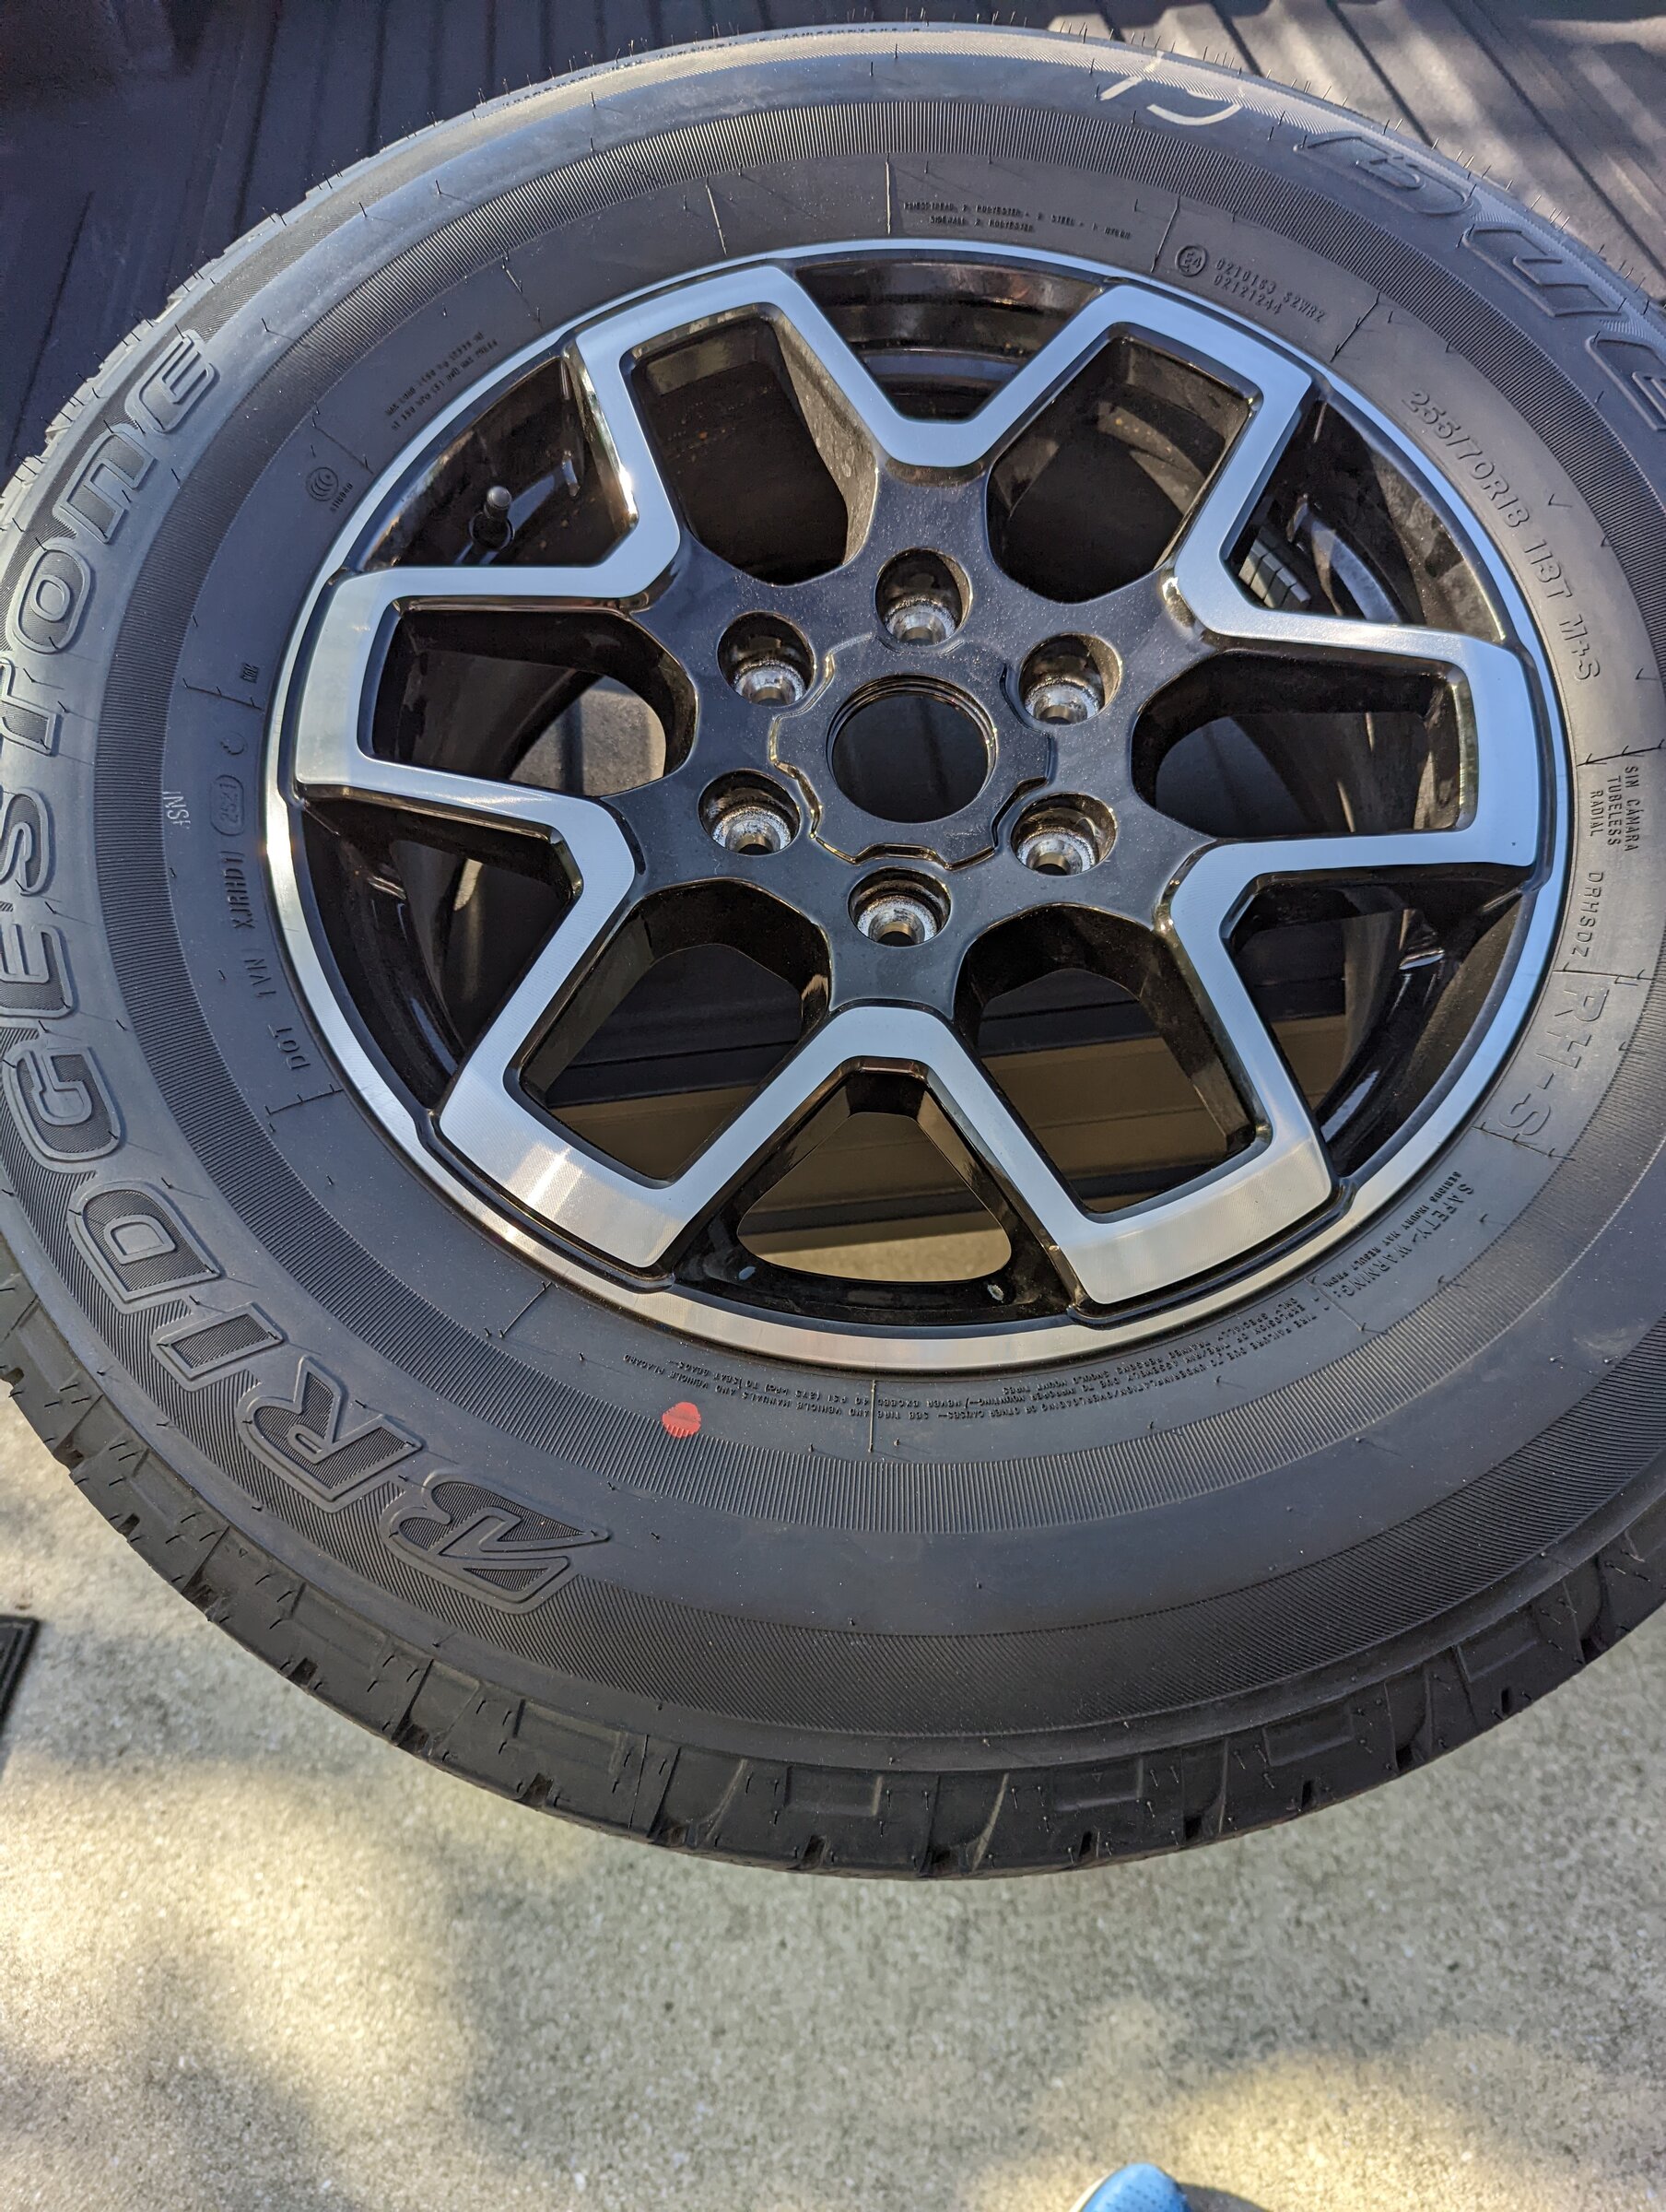 Ford Bronco Outer Banks wheels and tires For Sale Bridgestone Dueler 255/70R18 Tires PXL_20220419_213328192